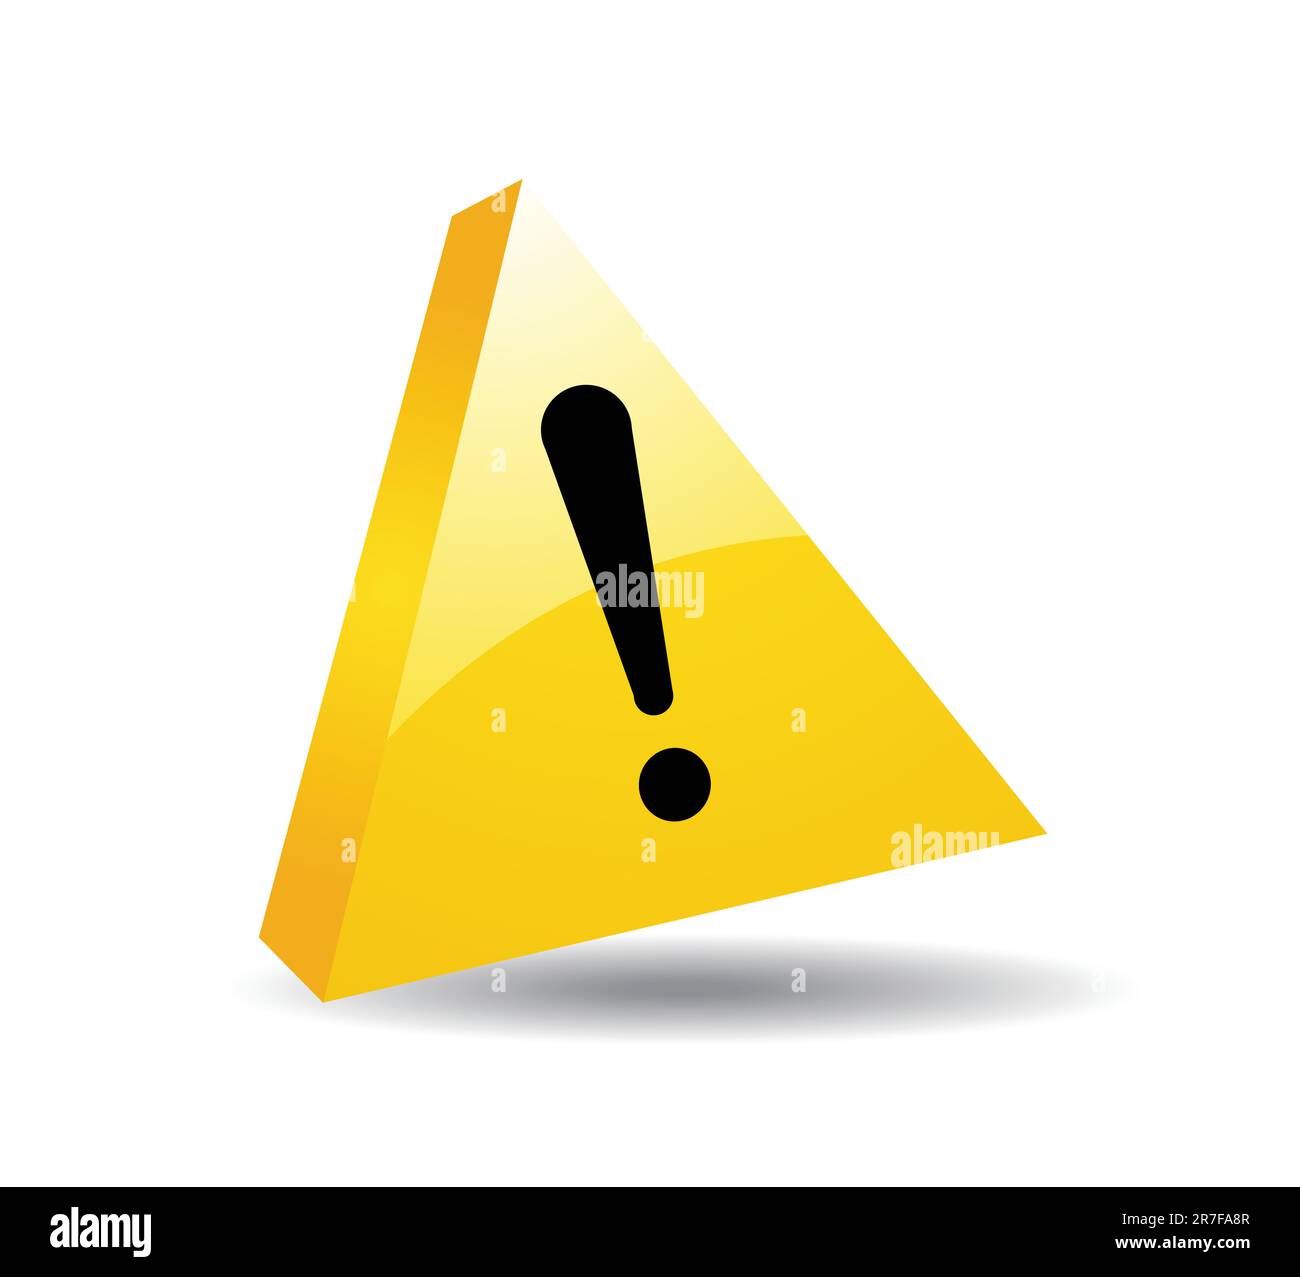 Warning alert sign Stock Vector Images - Alamy